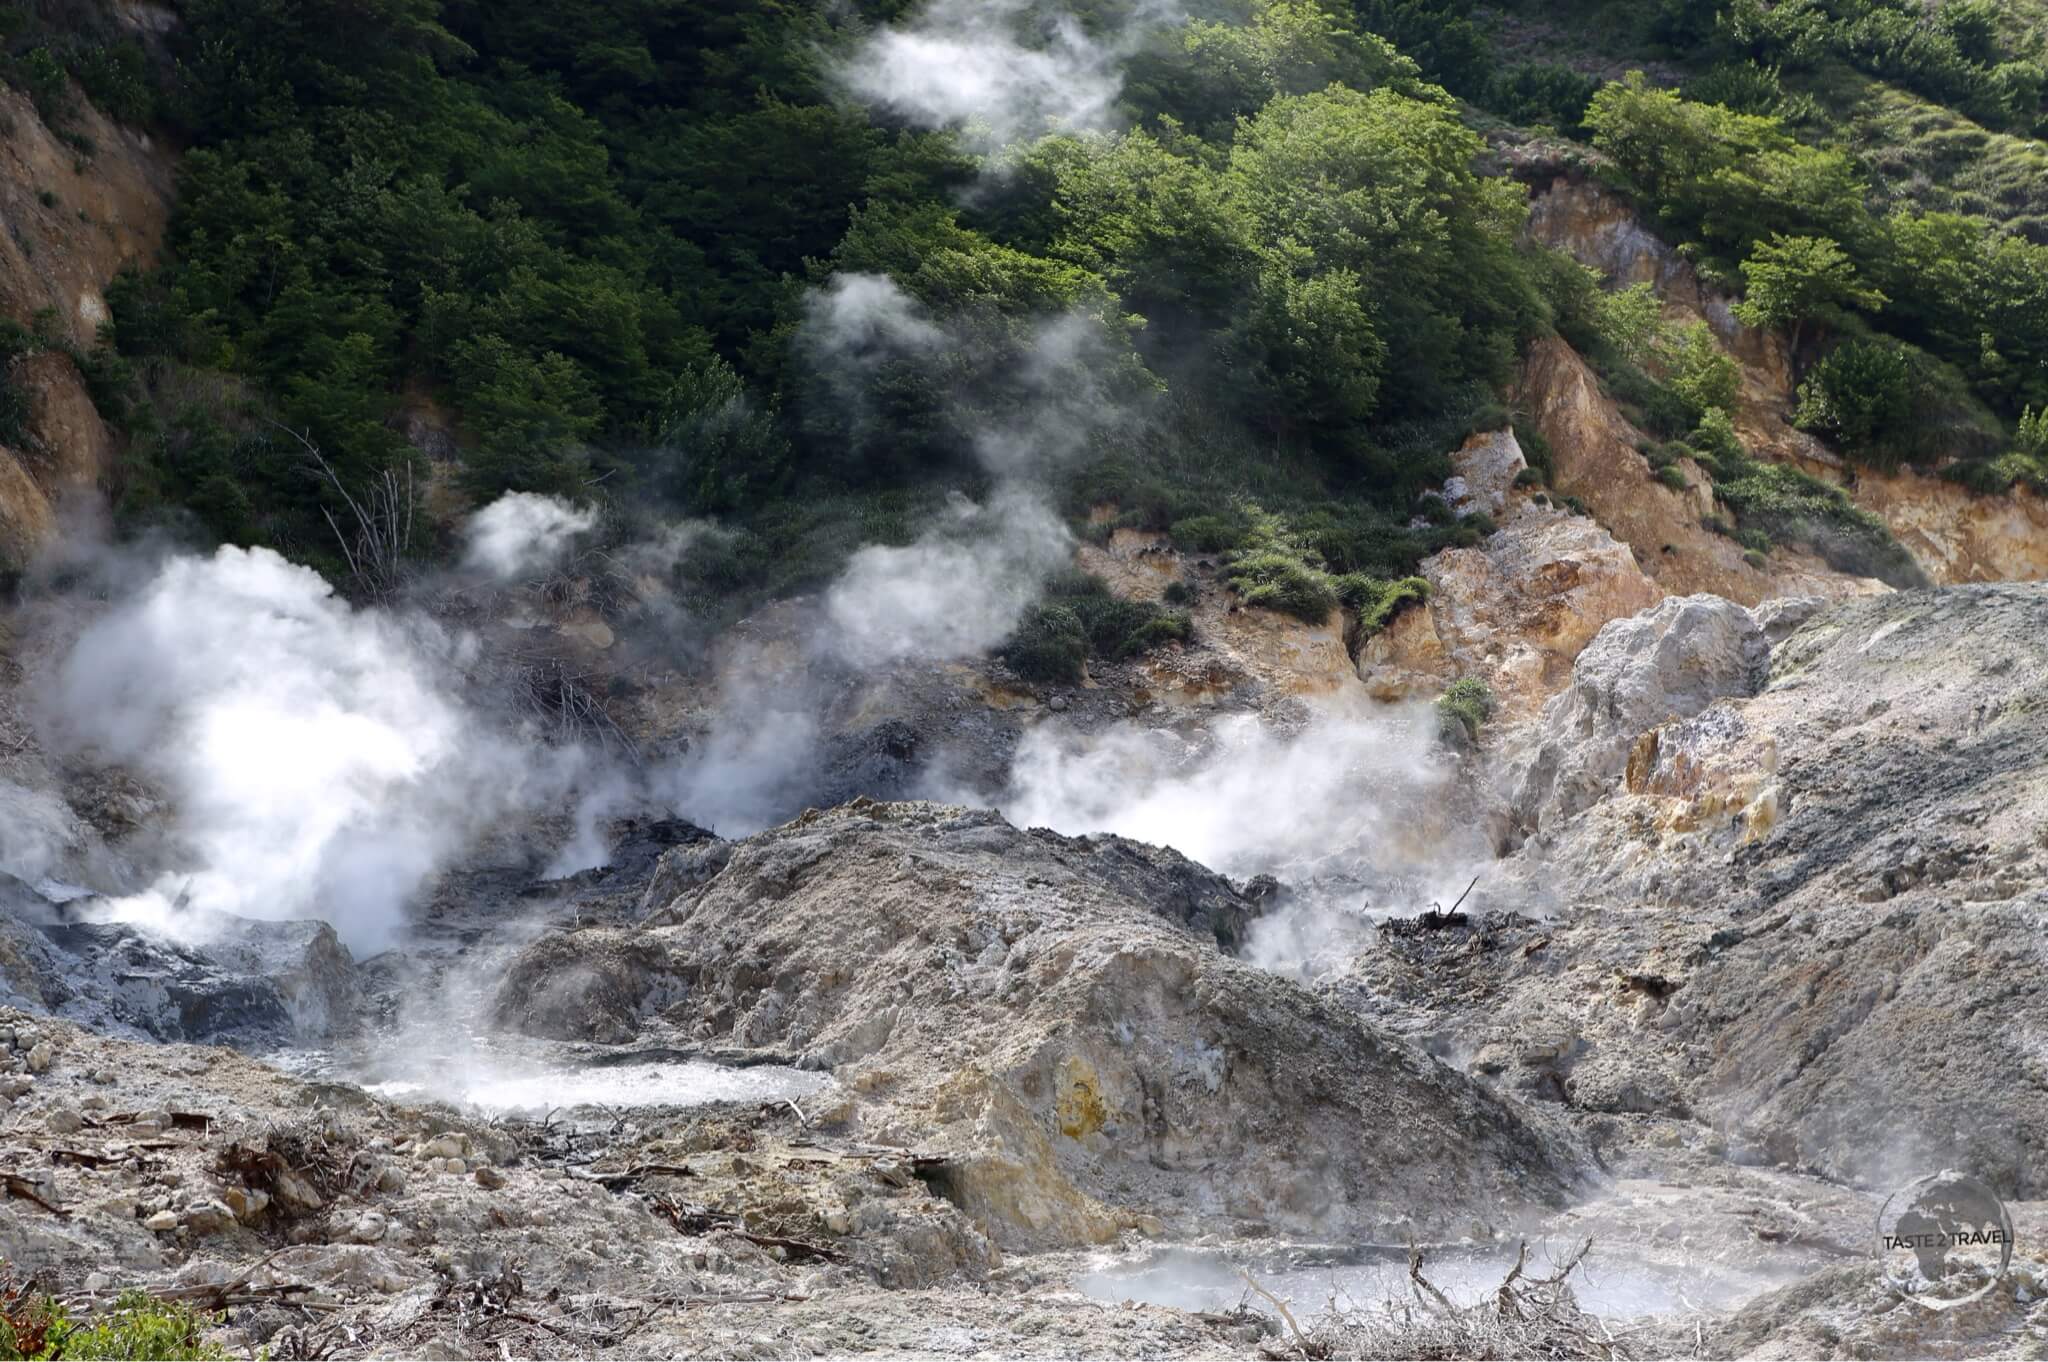 Located near the town of Soufrière, Sulphur Springs is the "world's only drive in volcano".